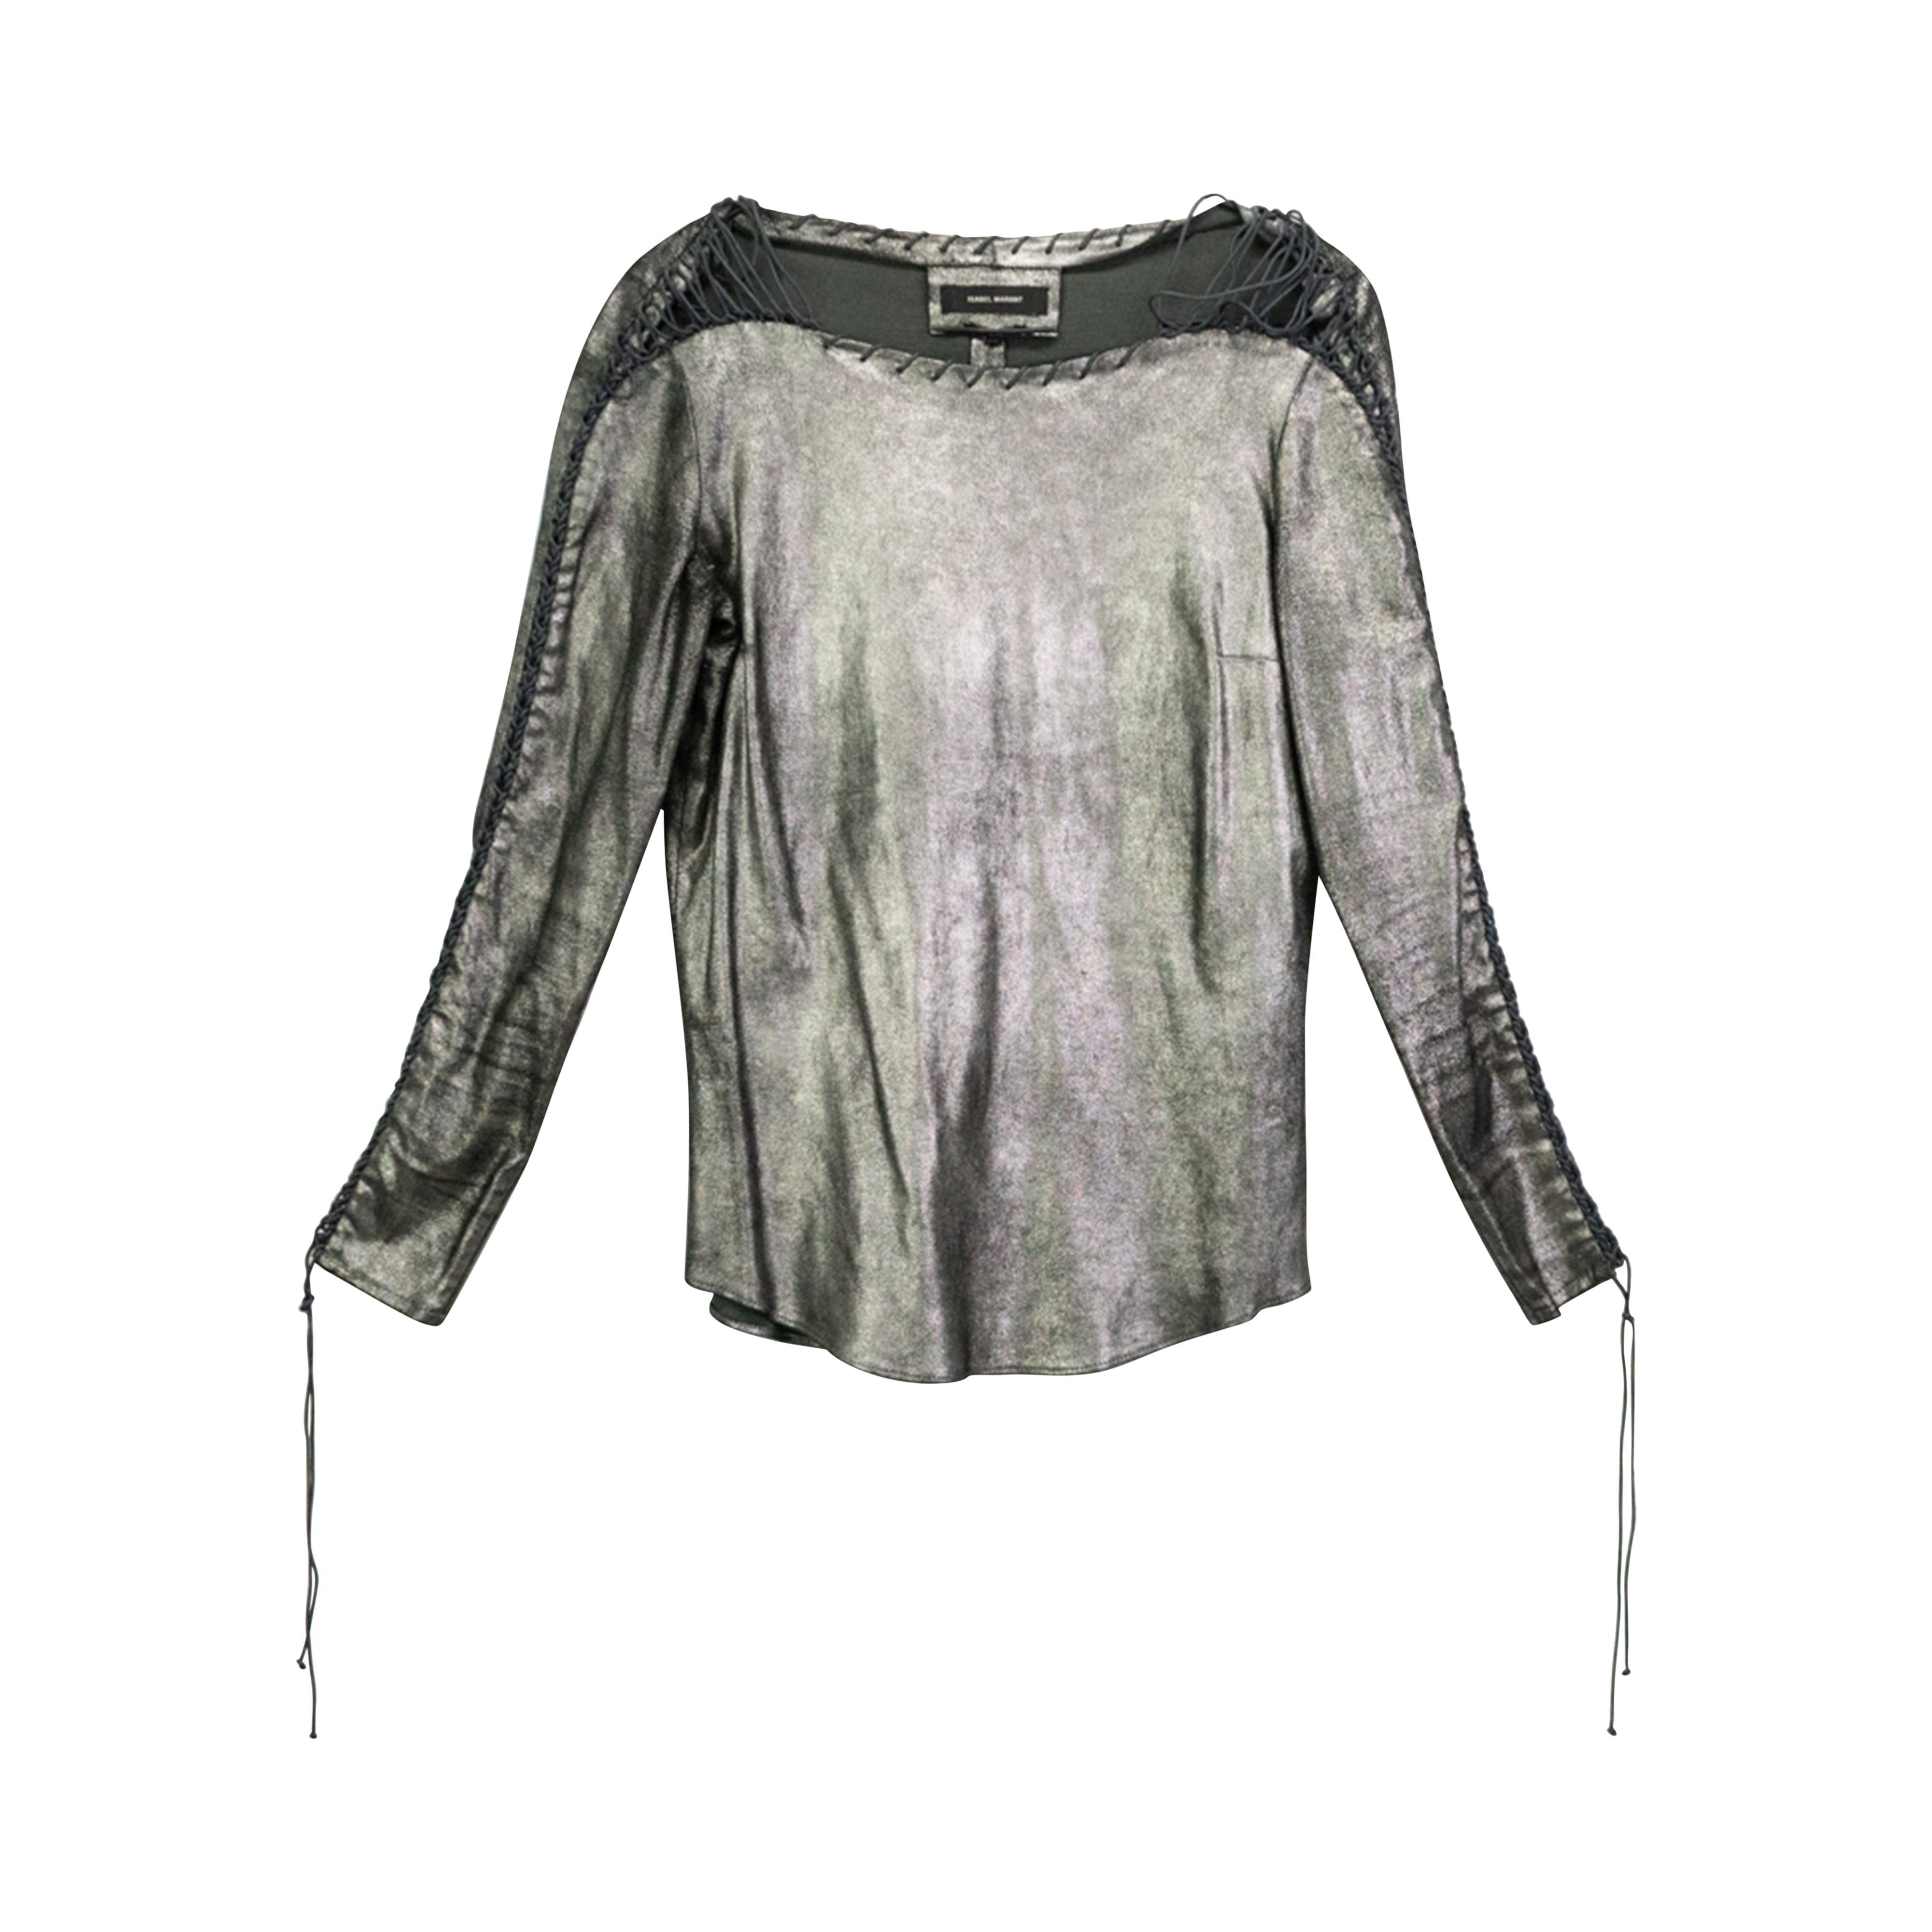 Isabel Marant Silver Top - Women's 40 - Fashionably Yours